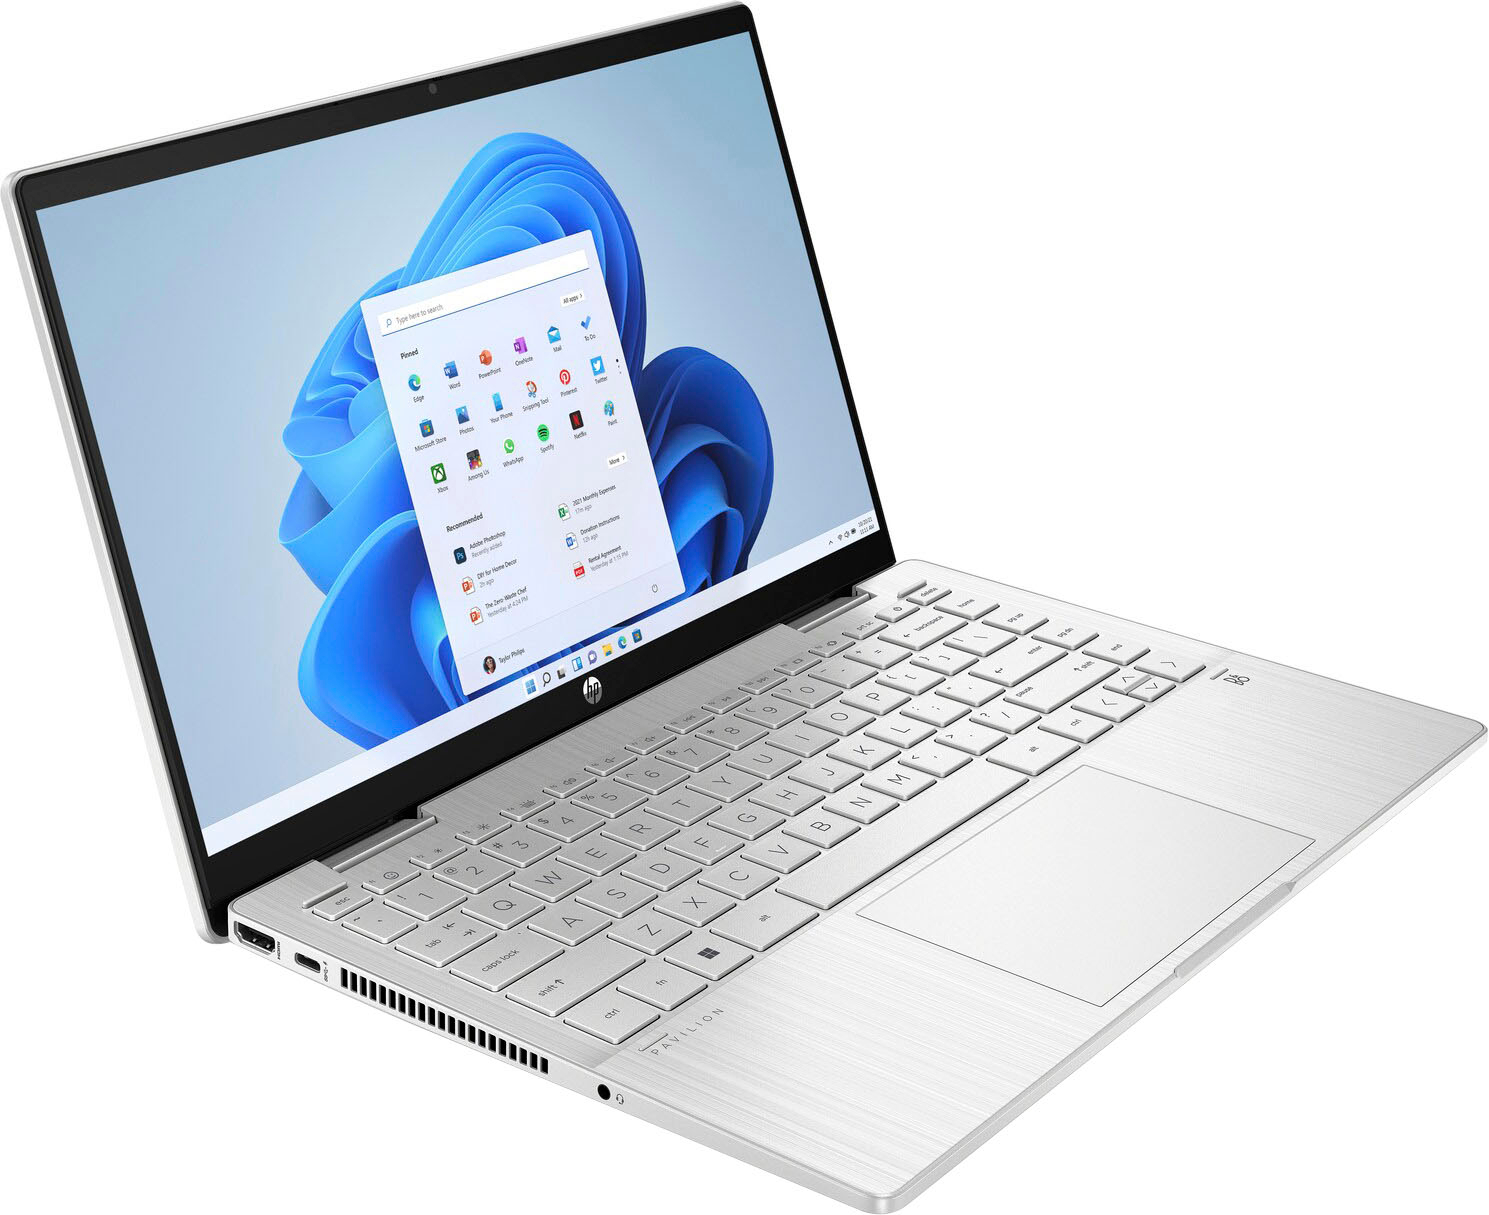 HP - Pavilion x360 2-in-1 14" Touch-Screen Laptop - Intel Core i5 - 8GB Memory - 512GB SSD - Natural Silver